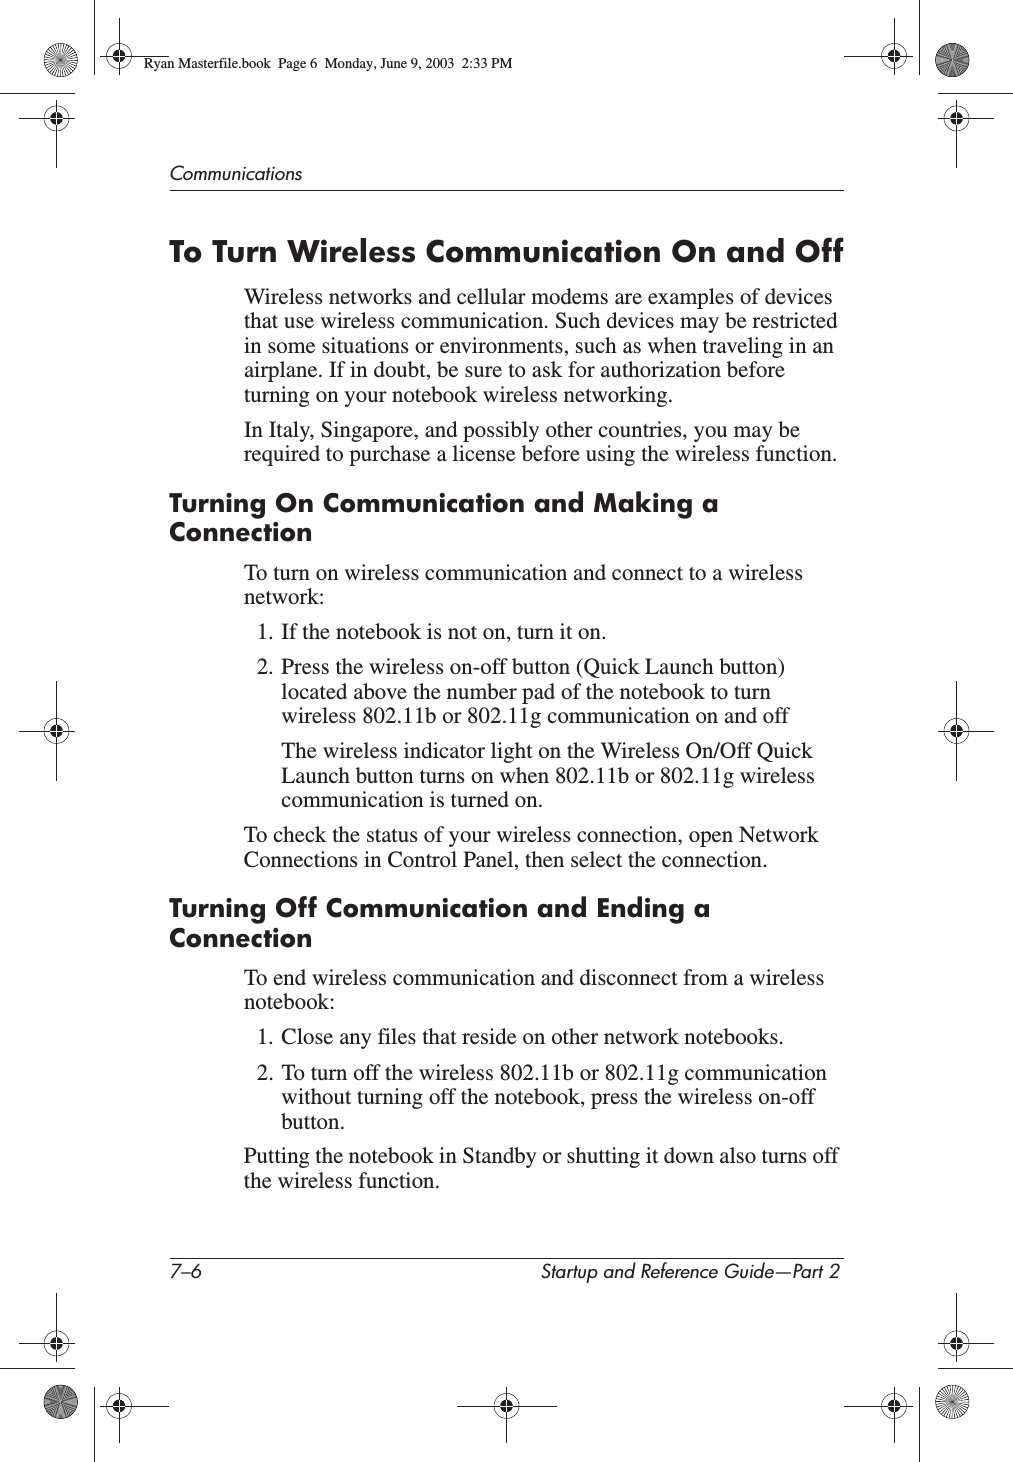 7–6 Startup and Reference Guide—Part 2CommunicationsTo Turn Wireless Communication On and OffWireless networks and cellular modems are examples of devices that use wireless communication. Such devices may be restricted in some situations or environments, such as when traveling in an airplane. If in doubt, be sure to ask for authorization before turning on your notebook wireless networking.In Italy, Singapore, and possibly other countries, you may be required to purchase a license before using the wireless function.Turning On Communication and Making a ConnectionTo turn on wireless communication and connect to a wireless network:1. If the notebook is not on, turn it on.2. Press the wireless on-off button (Quick Launch button) located above the number pad of the notebook to turn wireless 802.11b or 802.11g communication on and offThe wireless indicator light on the Wireless On/Off Quick Launch button turns on when 802.11b or 802.11g wireless communication is turned on.To check the status of your wireless connection, open Network Connections in Control Panel, then select the connection.Turning Off Communication and Ending a ConnectionTo end wireless communication and disconnect from a wireless notebook:1. Close any files that reside on other network notebooks.2. To turn off the wireless 802.11b or 802.11g communication without turning off the notebook, press the wireless on-off button.Putting the notebook in Standby or shutting it down also turns off the wireless function.Ryan Masterfile.book  Page 6  Monday, June 9, 2003  2:33 PM